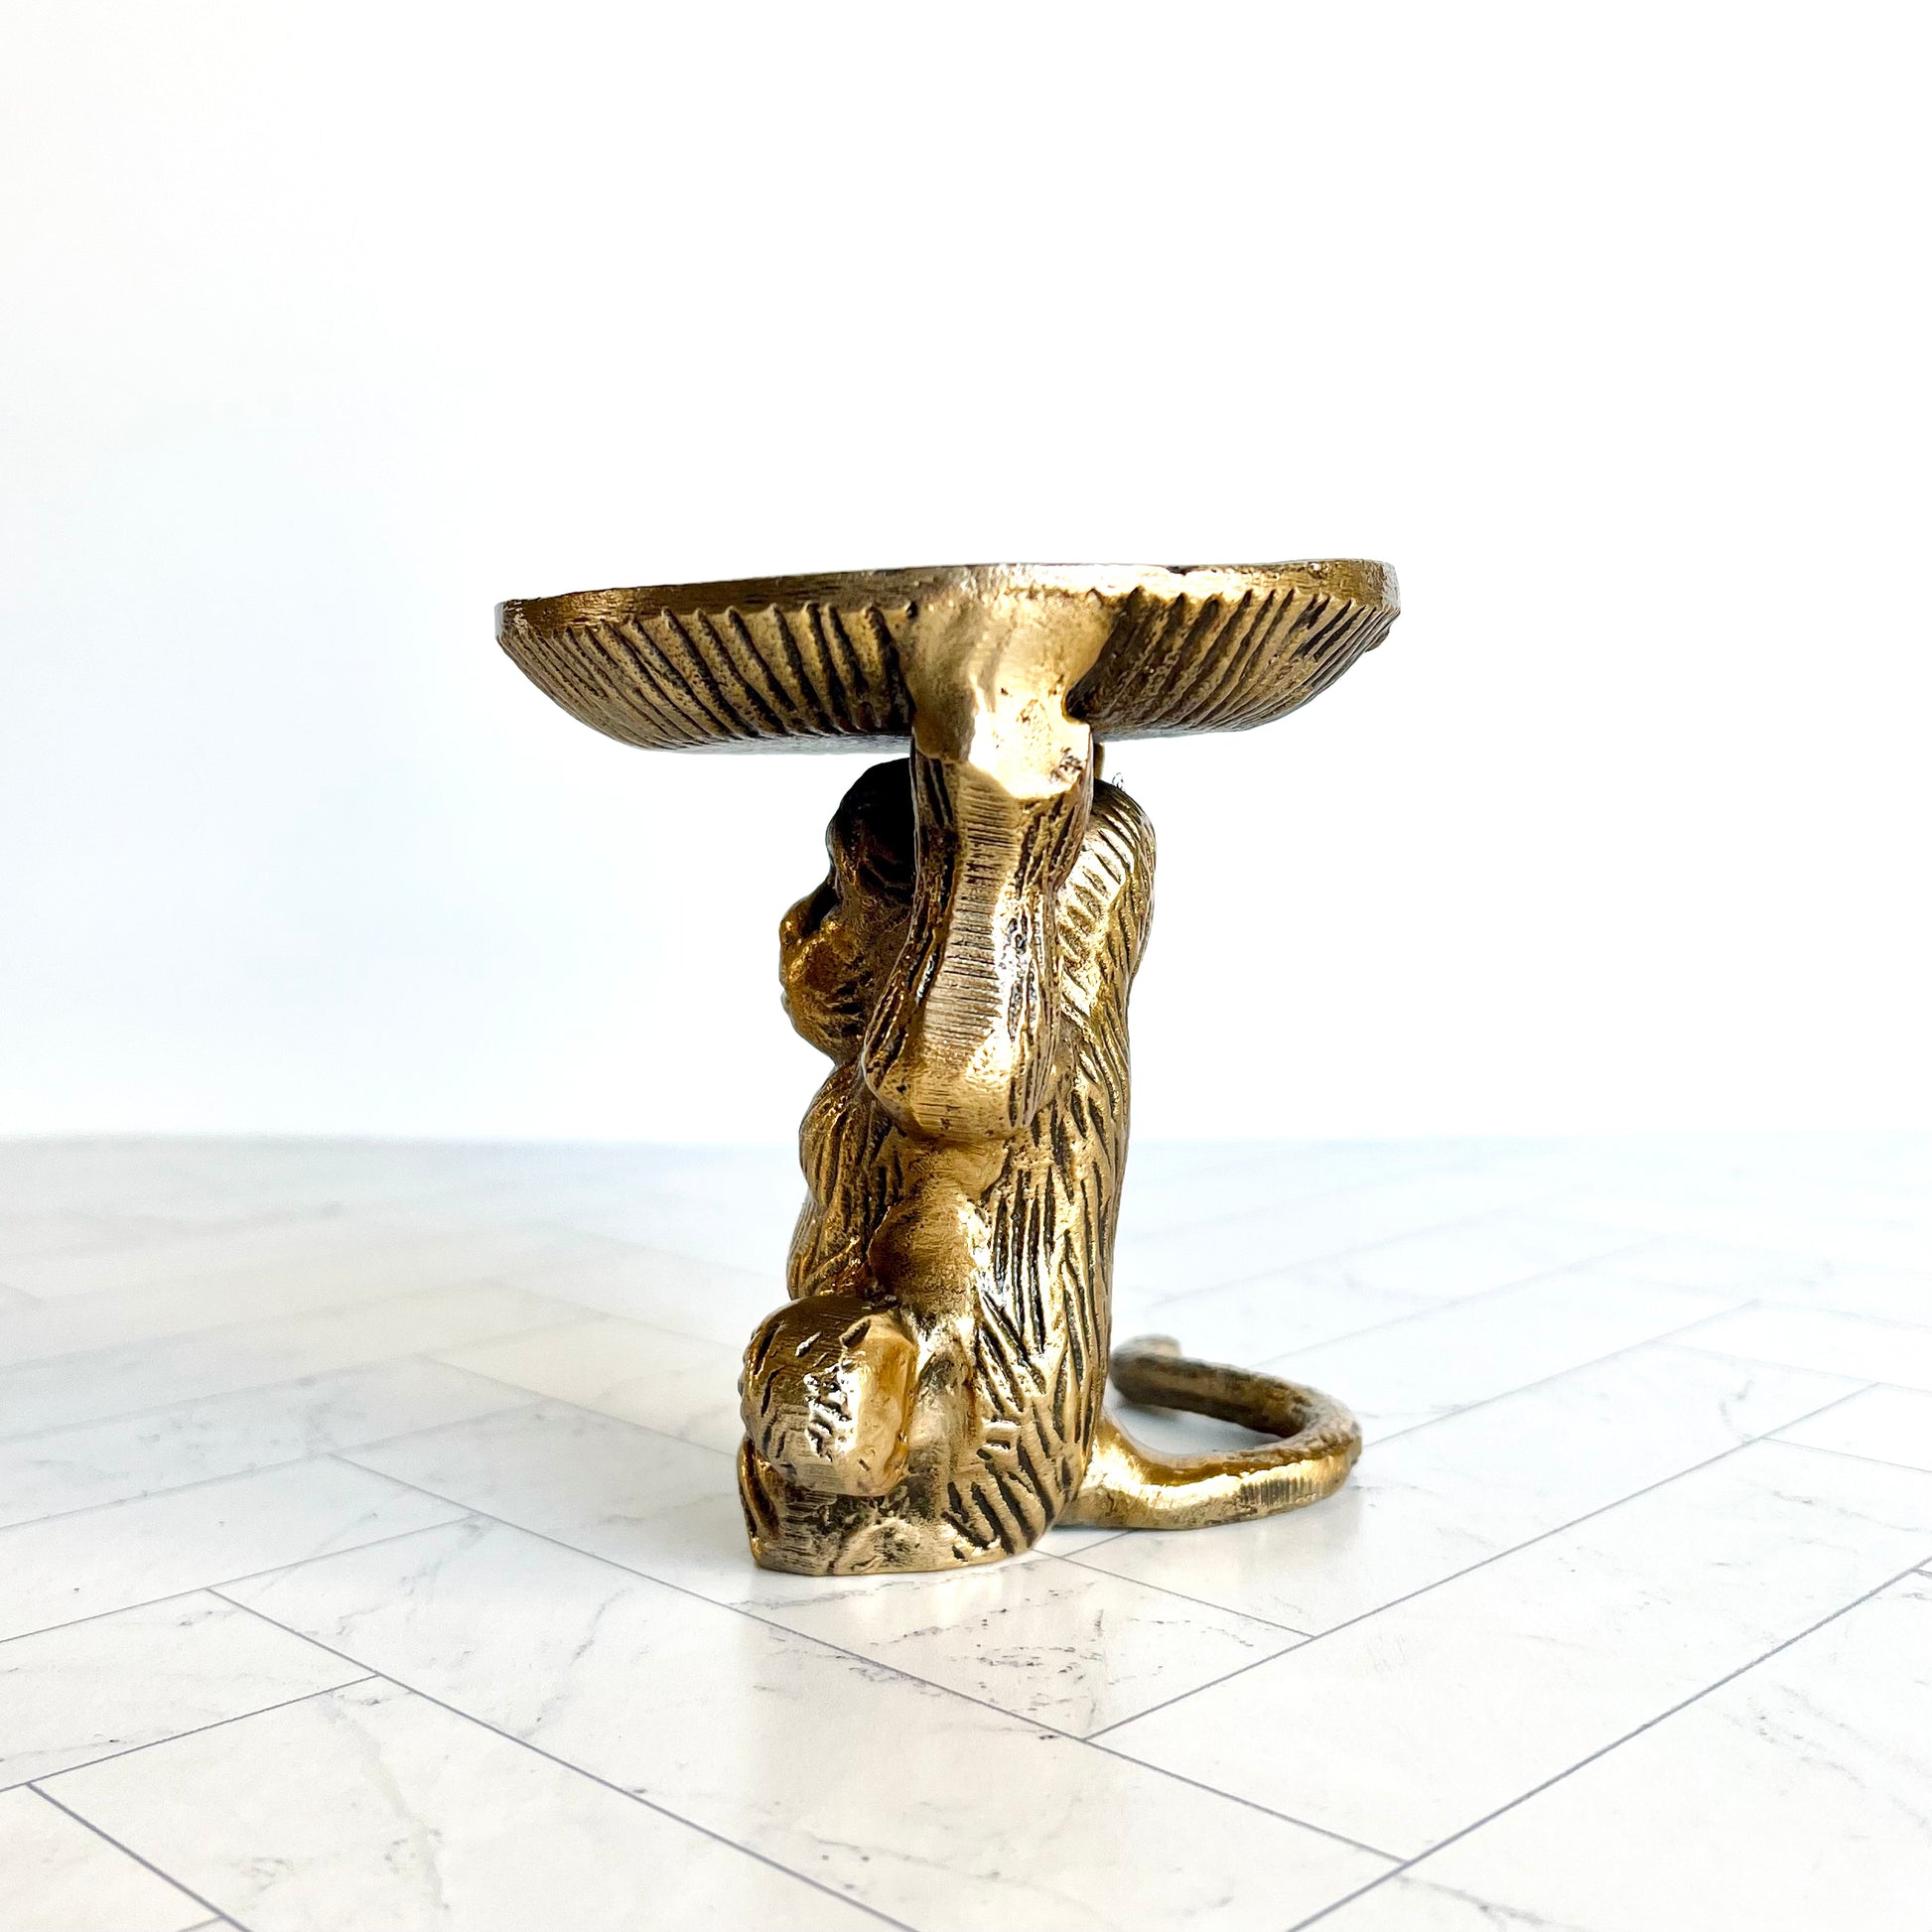 The brass animal figurine shown from the side